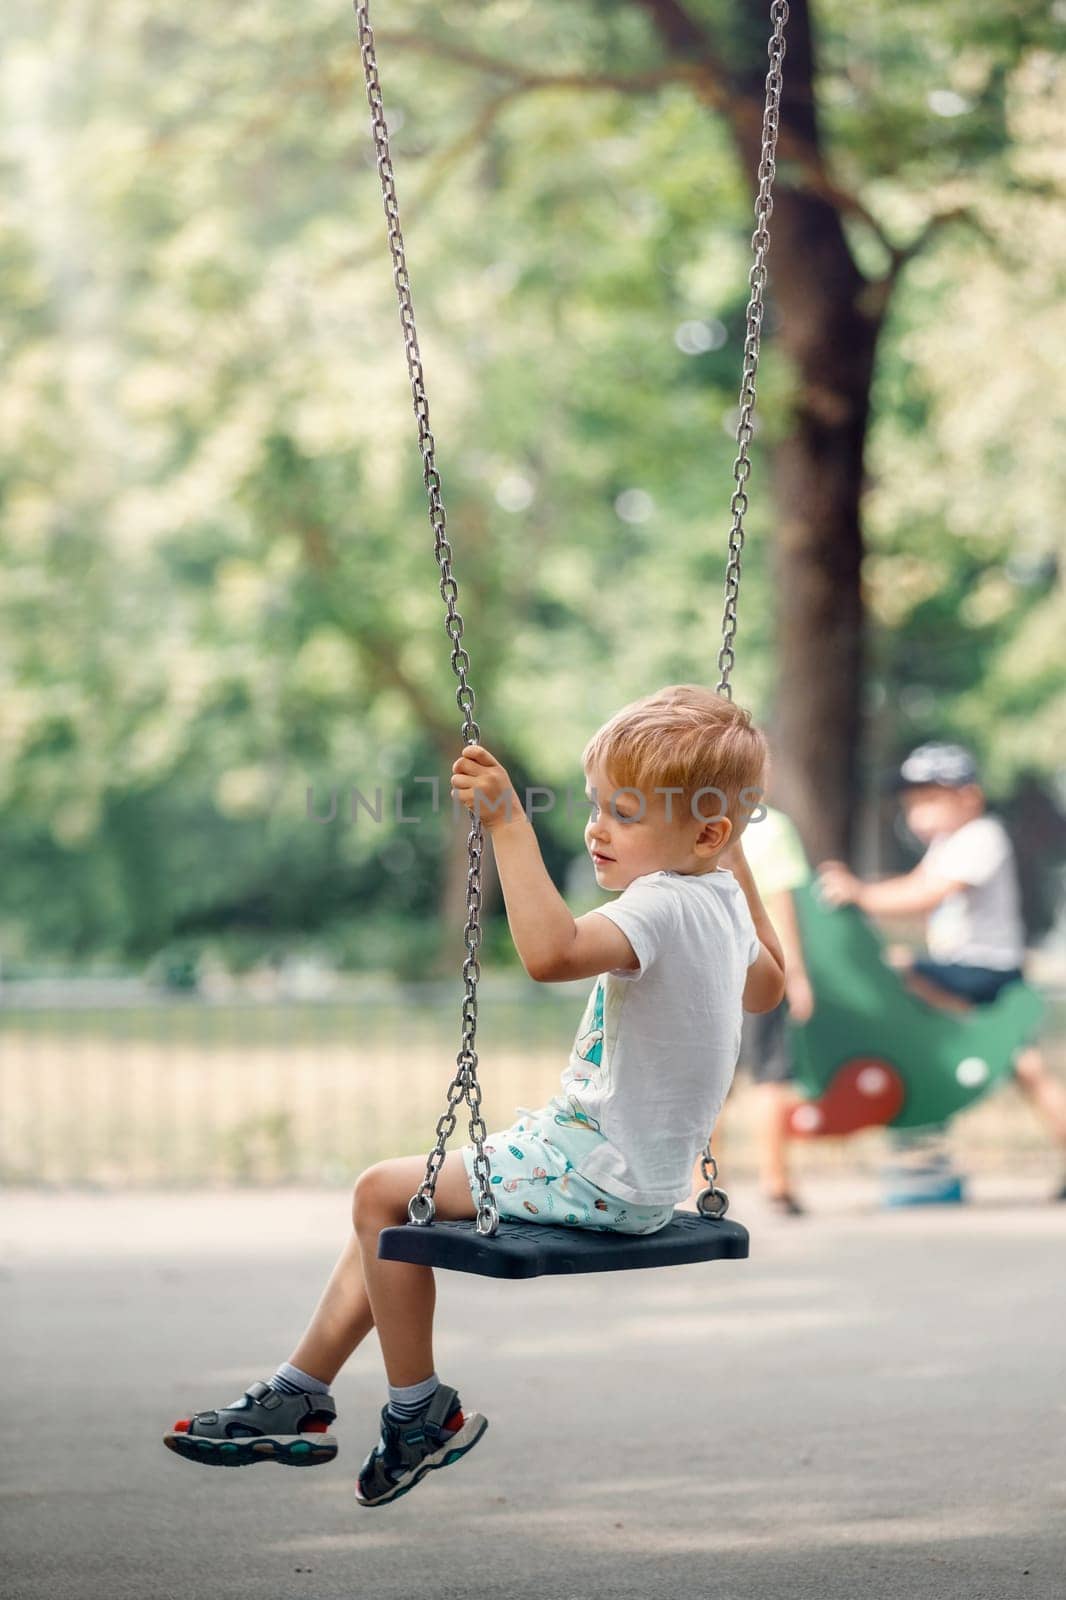 Child on playground. Swing Kids play outdoor. by Lincikas